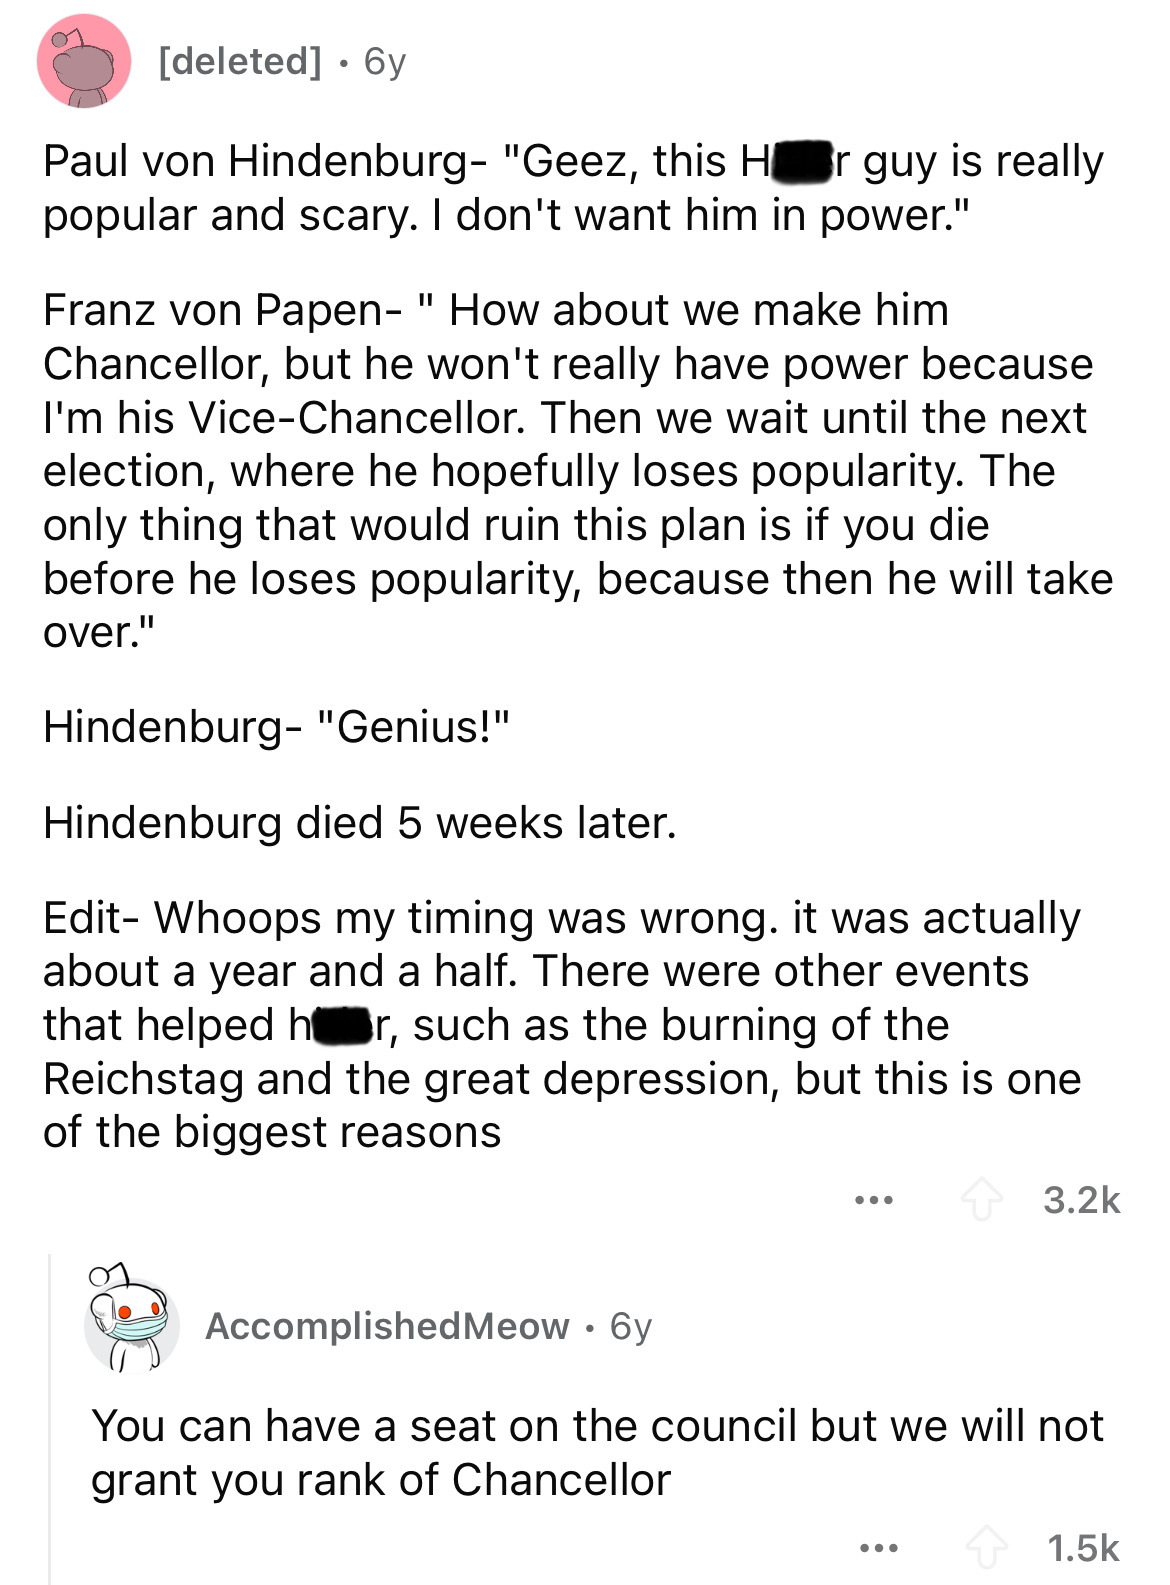 document - deleted 6y Paul von Hindenburg "Geez, this Hor guy is really popular and scary. I don't want him in power." Franz von Papen " How about we make him Chancellor, but he won't really have power because I'm his ViceChancellor. Then we wait until th